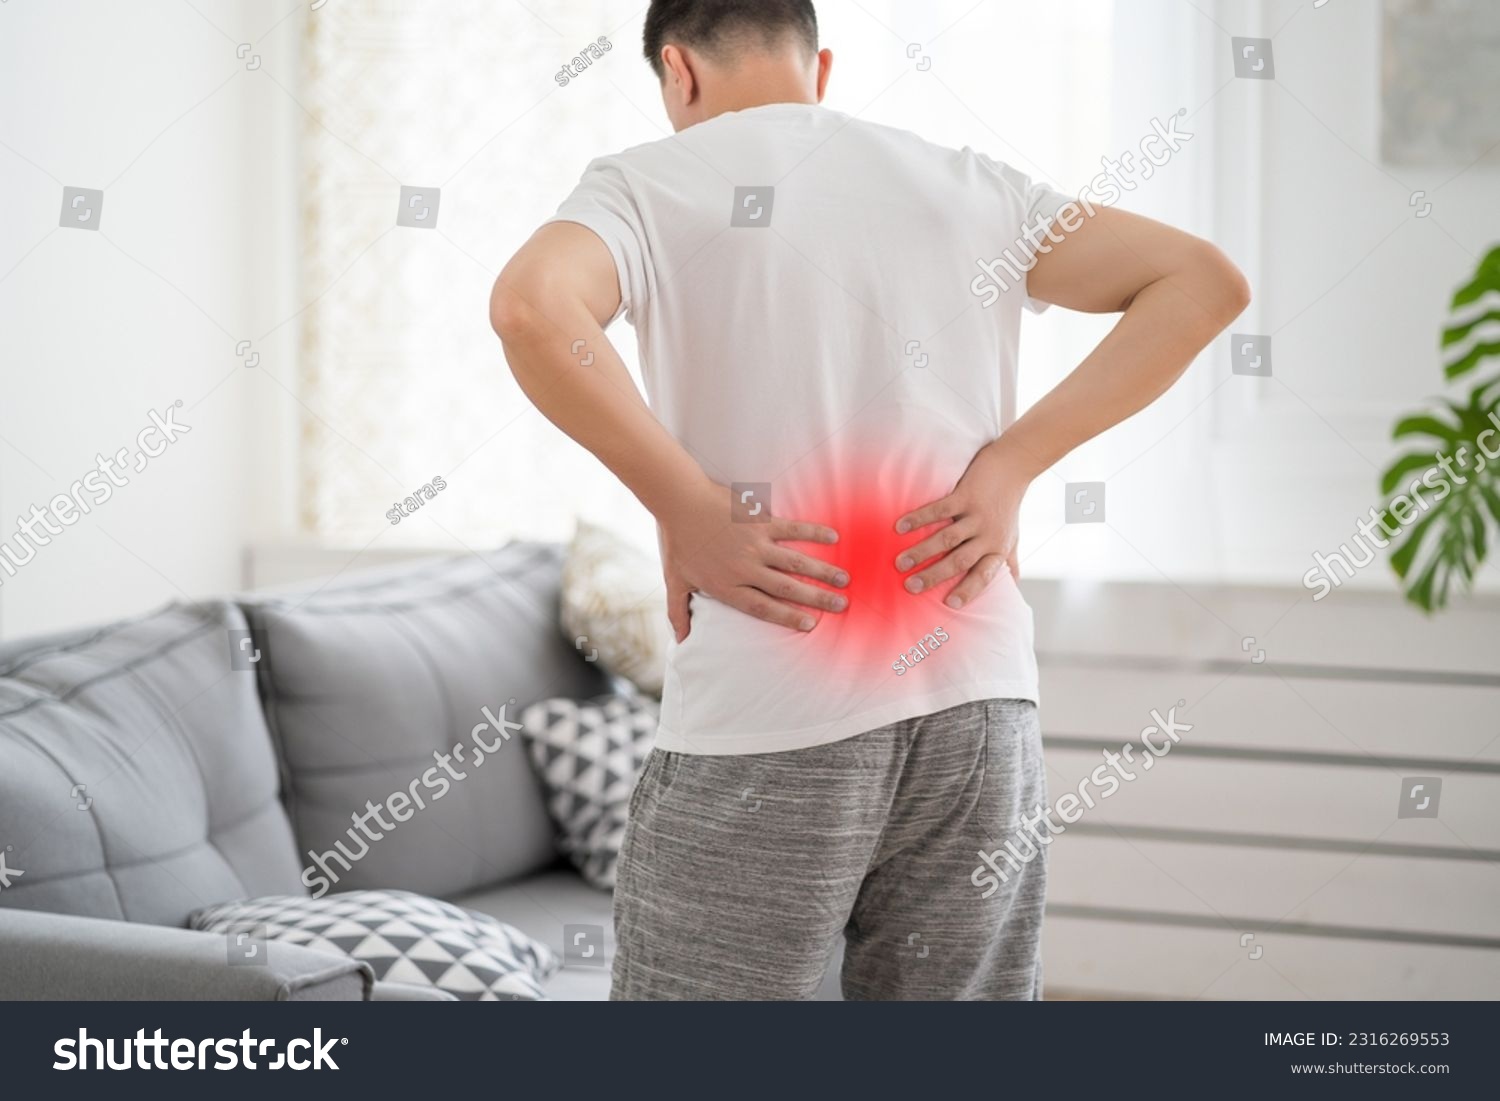 Back pain, kidney inflammation, man suffering from backache at home, health problems concept #2316269553